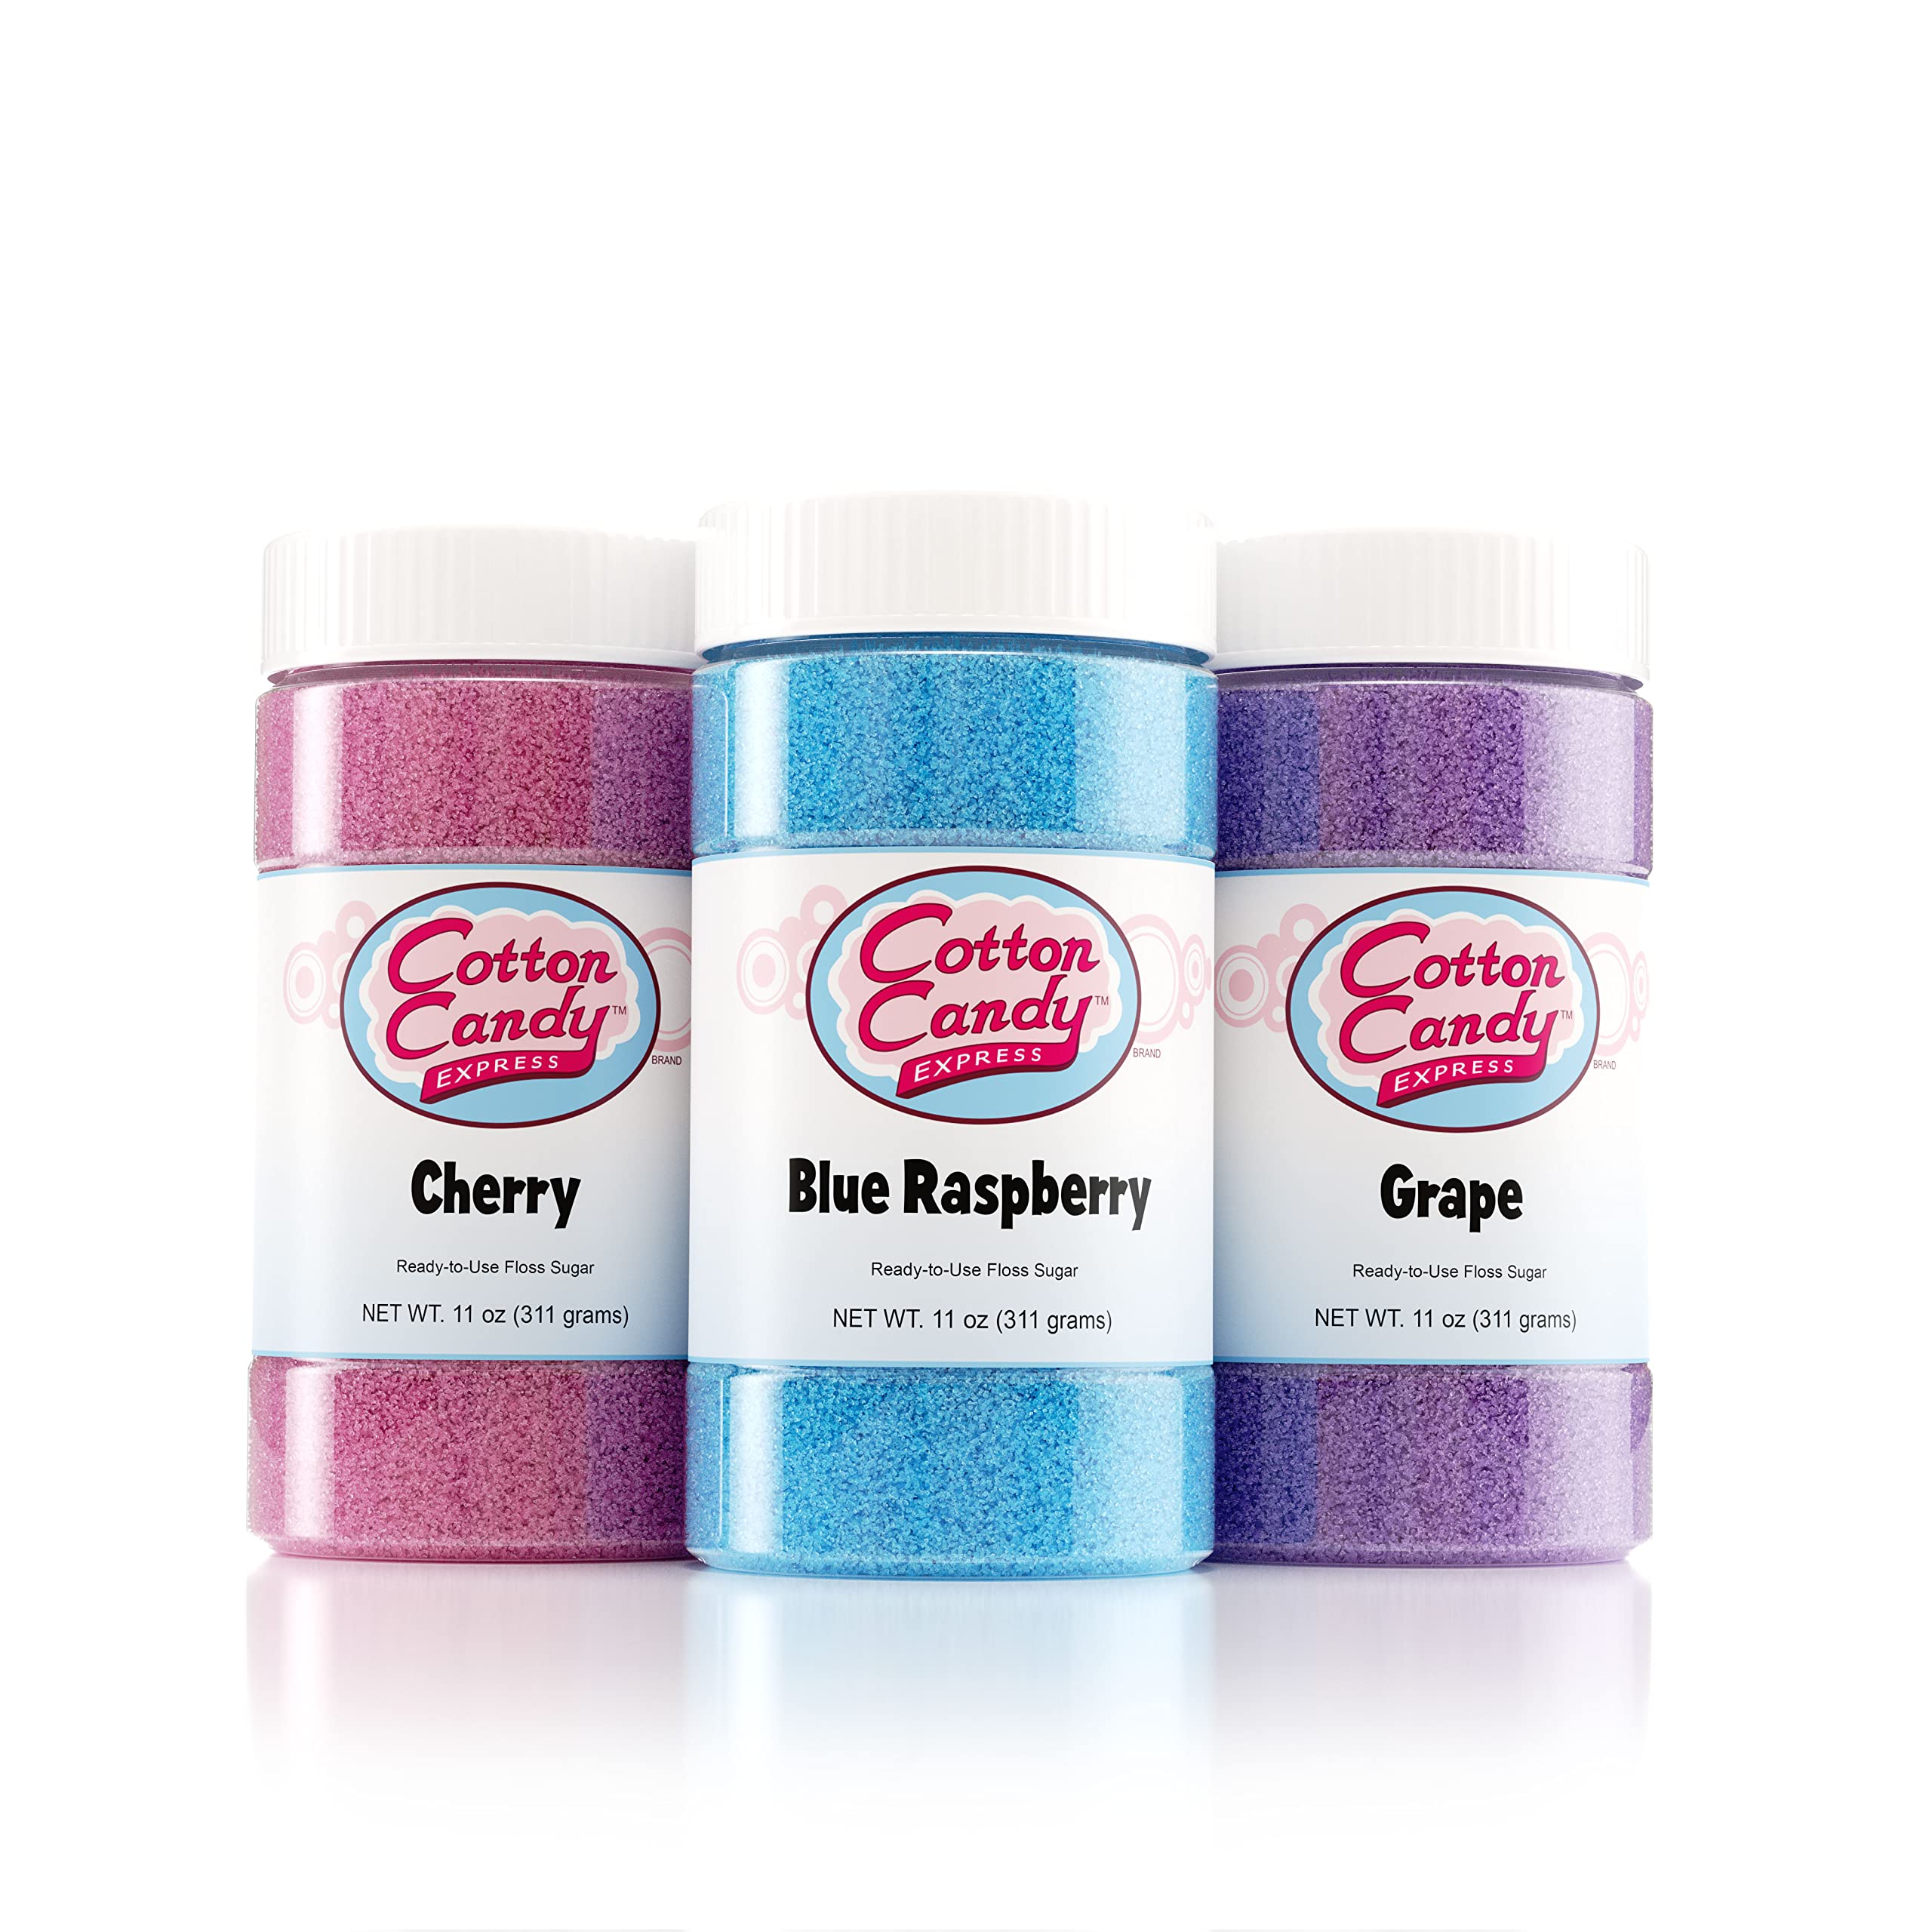 Cotton Candy Express 3 Flavor Sugar Pack with Cotton Candy Cones - Featuring Cherry, Grape, and Blue Raspberry Floss Sugar and 100 Paper Cones for Making Cotton Candy